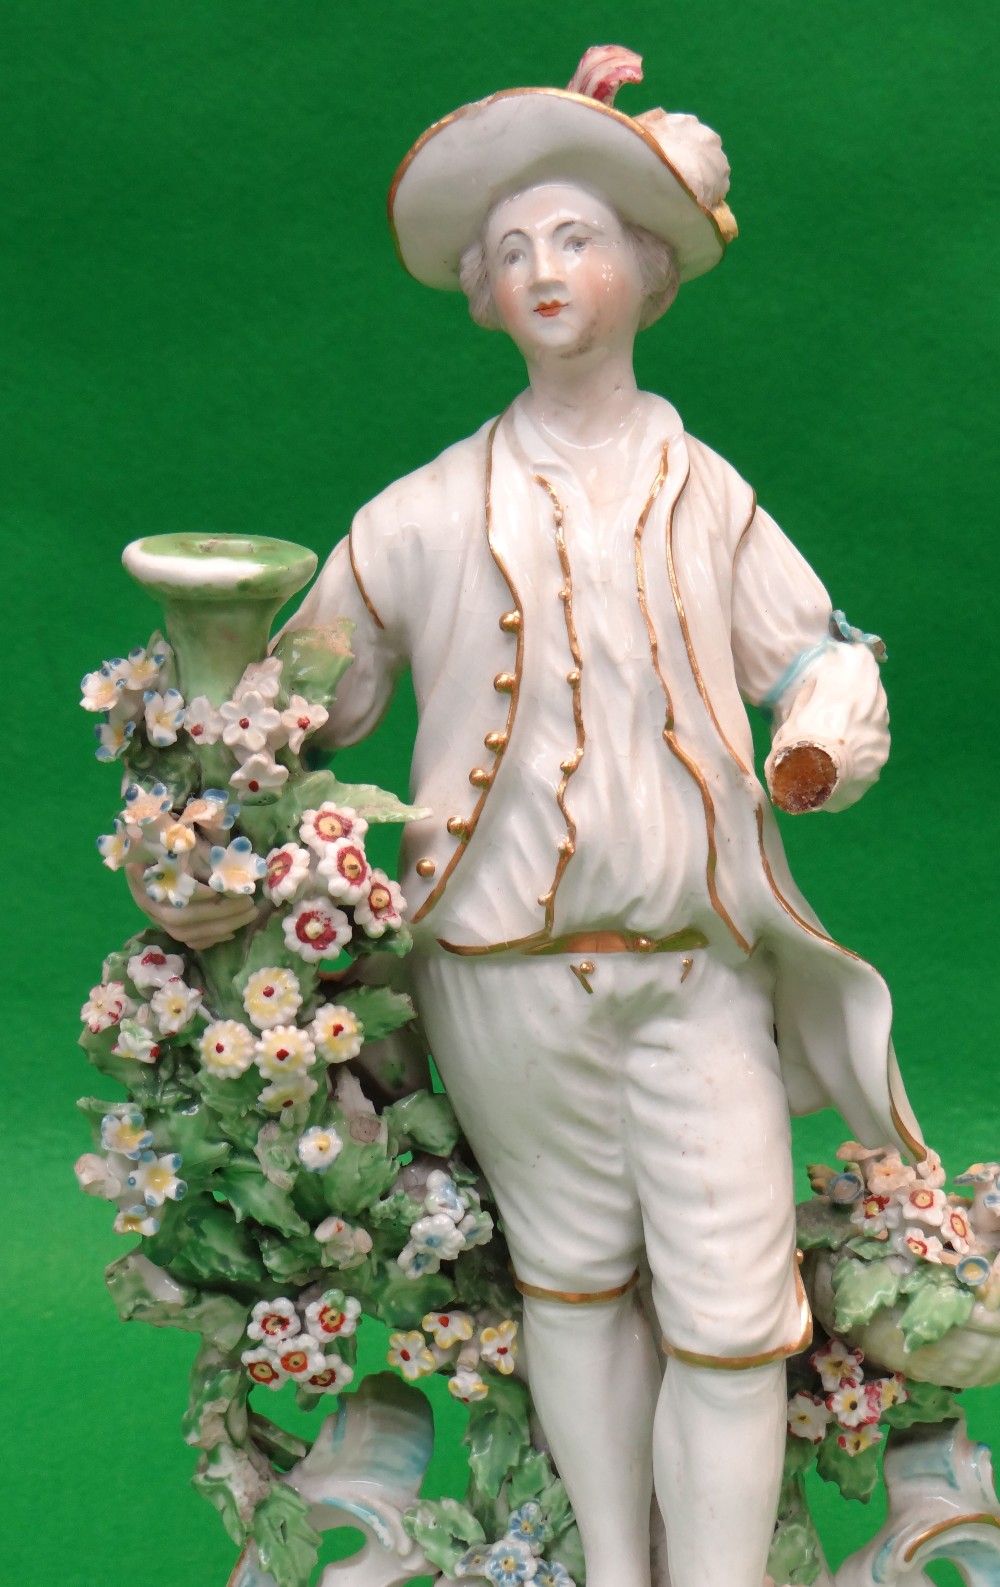 PAIR LATE 18TH CENTURY PORCELAIN CANDLESTICK FIGURES, probably Chelsea-Derby c. 1770, she holding - Image 5 of 7